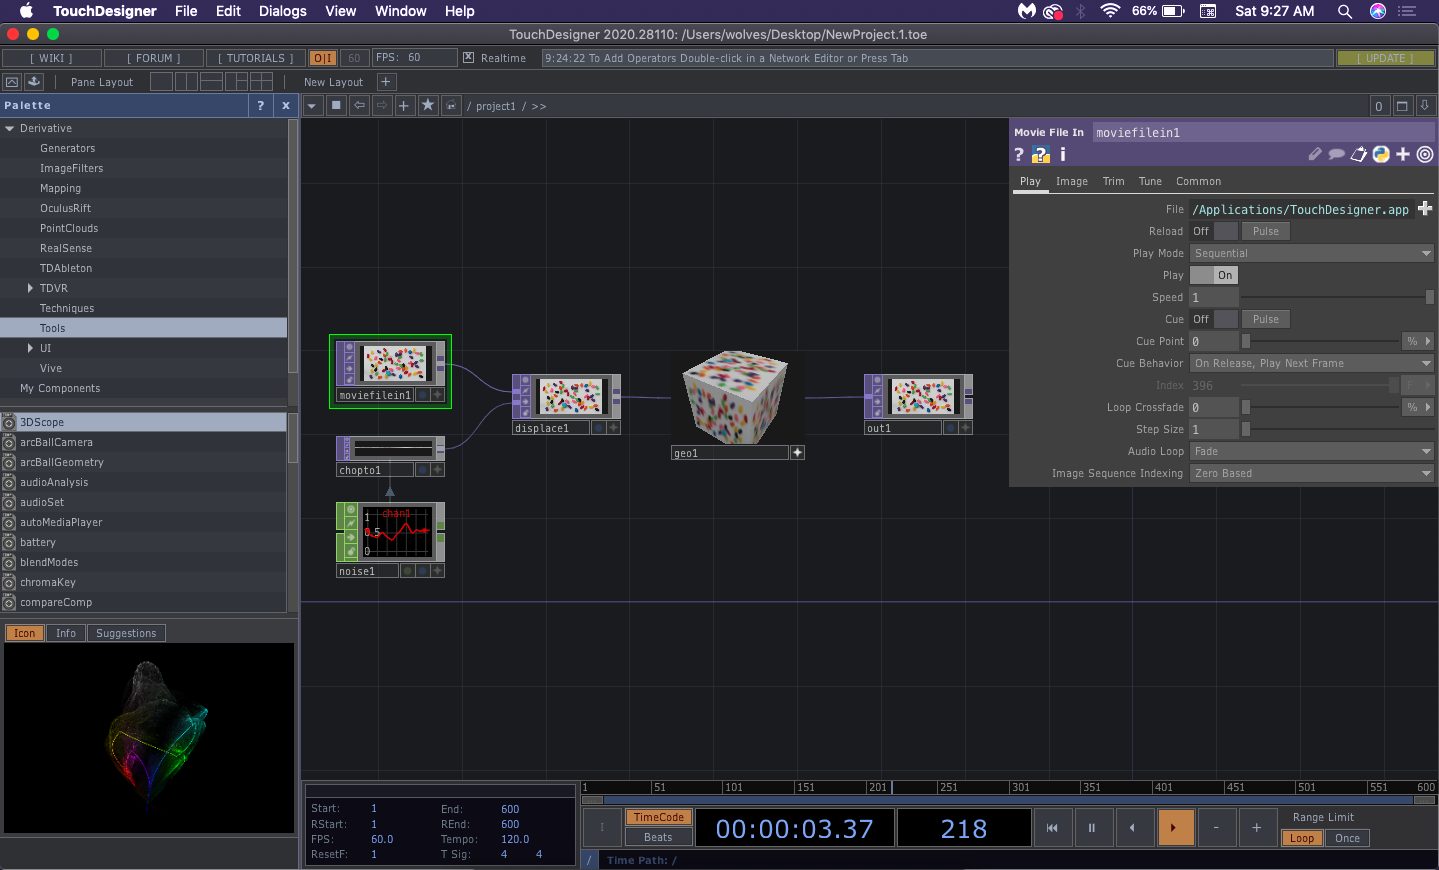 The first screen of TouchDesigner will show a sample network, a large menu on the far left that is a palette browser, and an information window to the far right that is the Movie File In TOP paramter window.